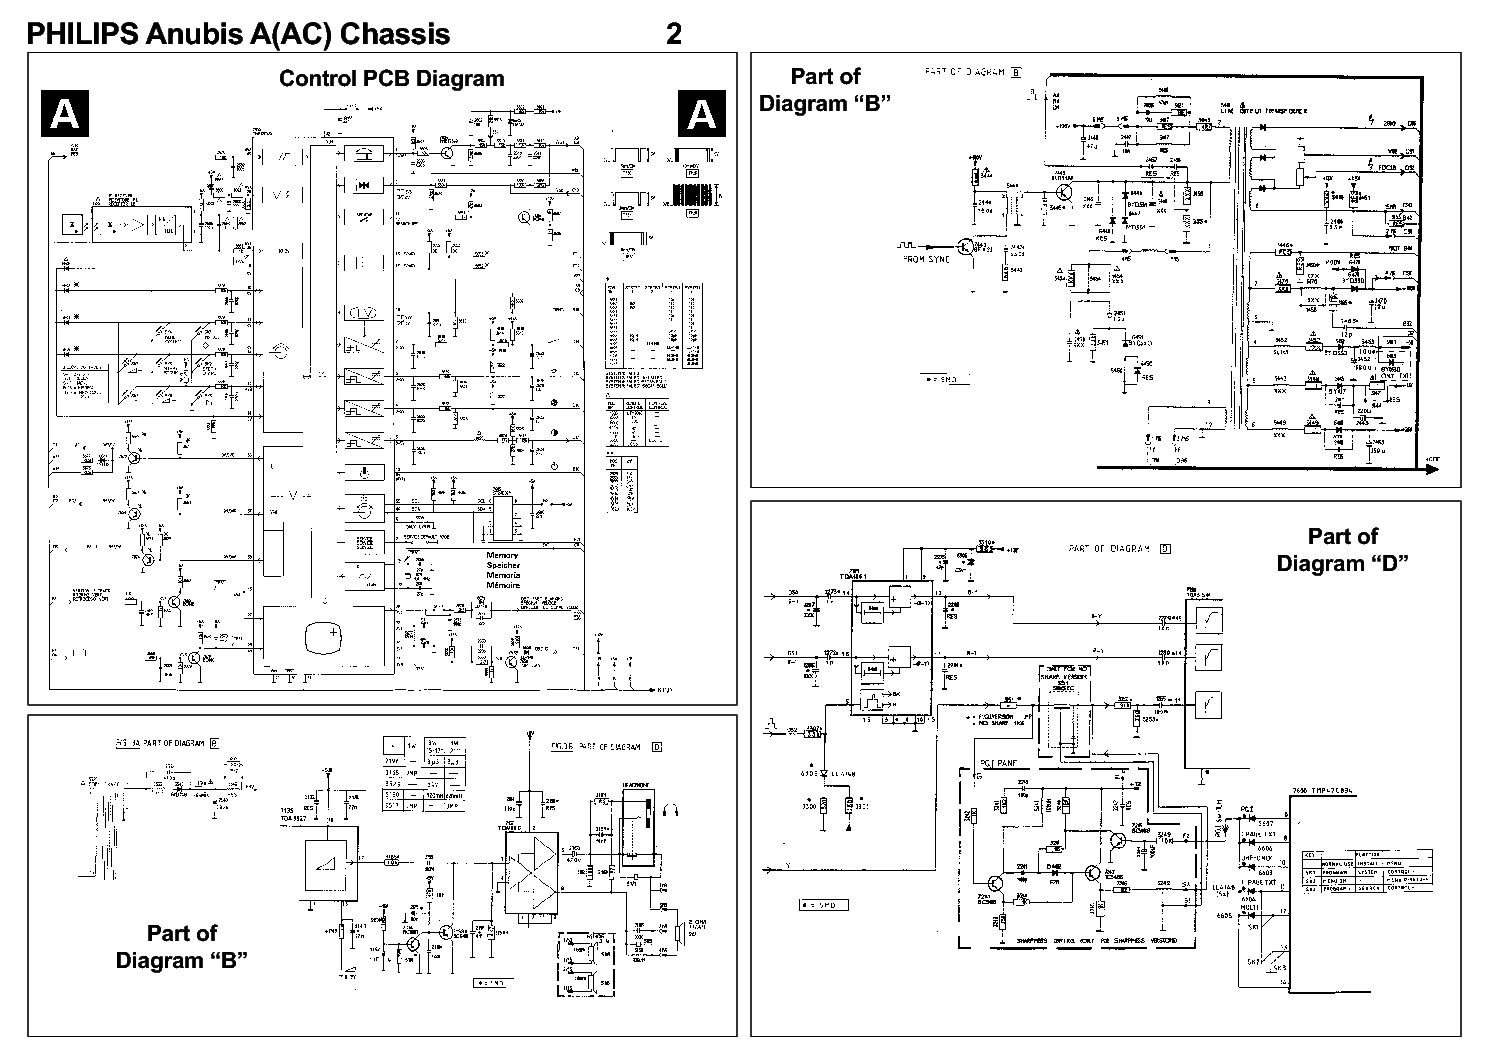 PHILIPS CHASSIS ANUBIS A-AC service manual (2nd page)